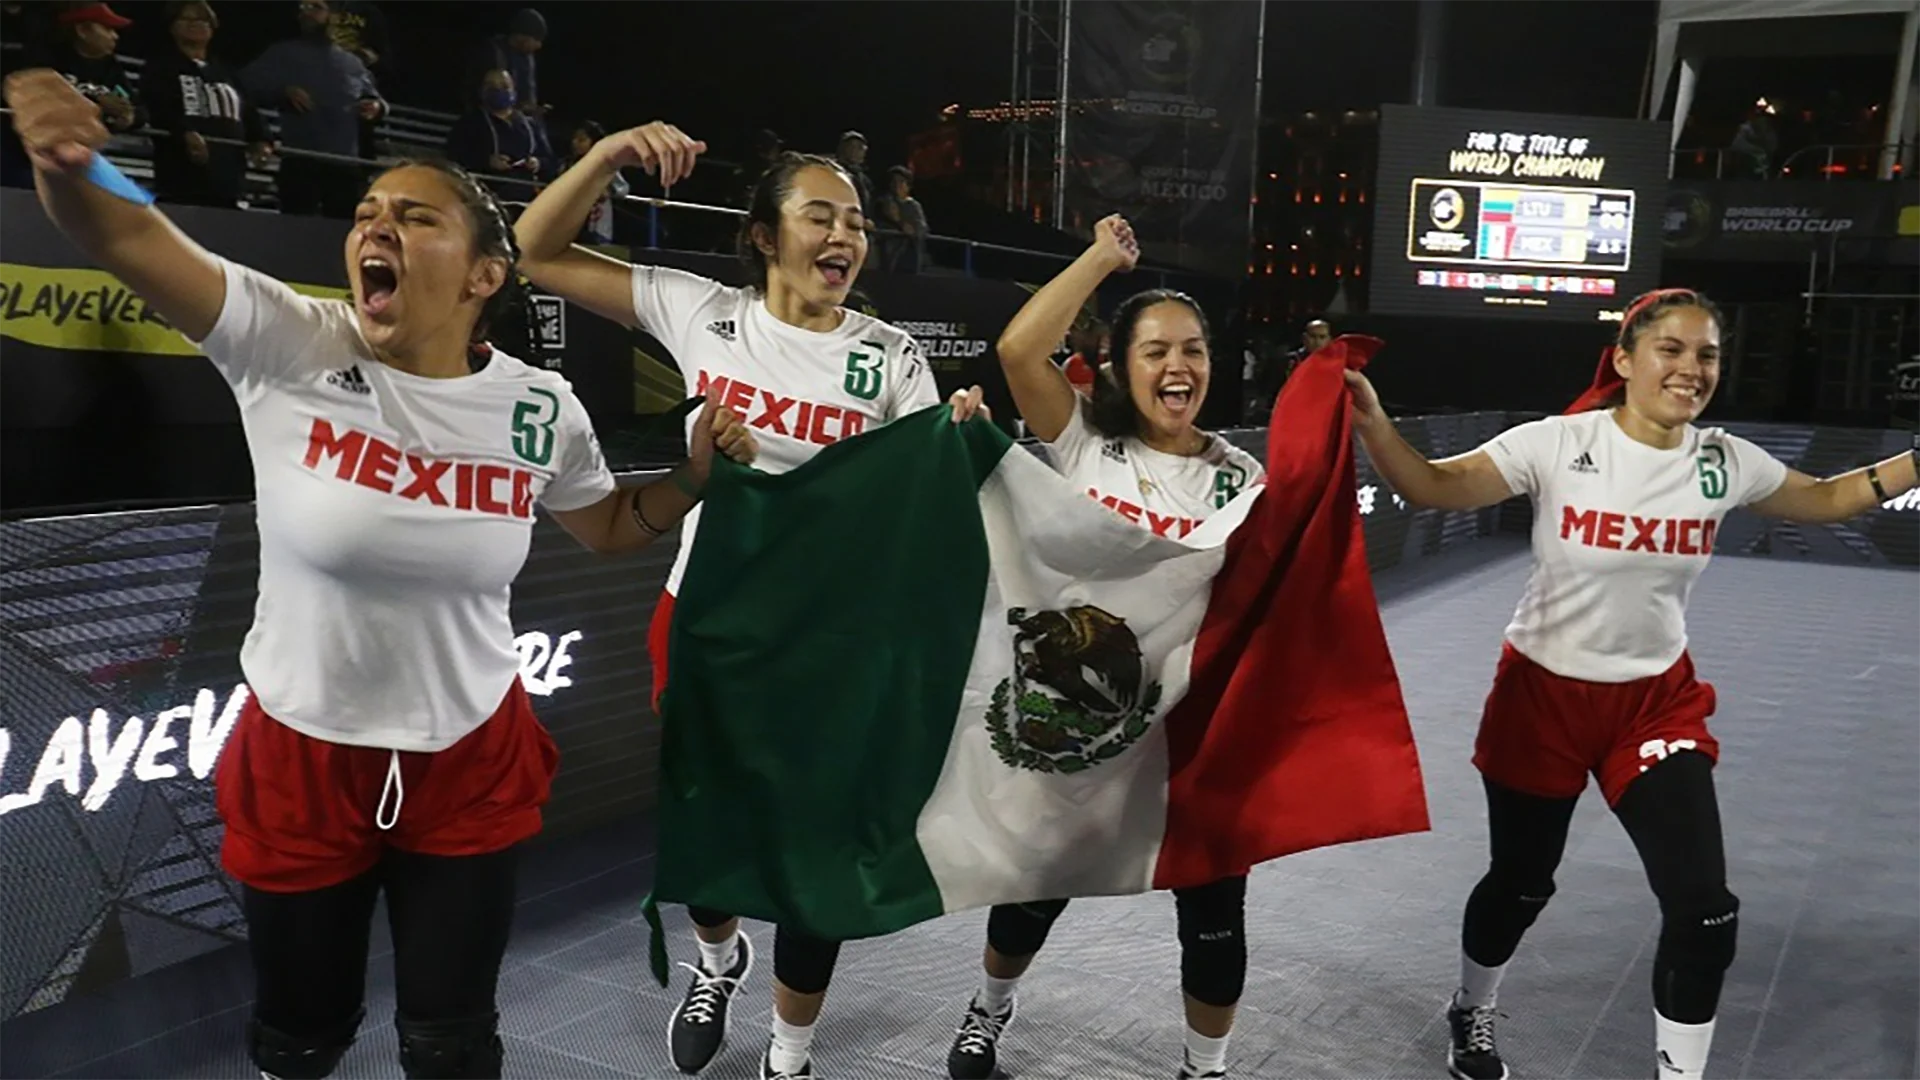 Baseball5 rates five stars with fans as the Baseball5 World Cup makes a grand debut in Mexico City